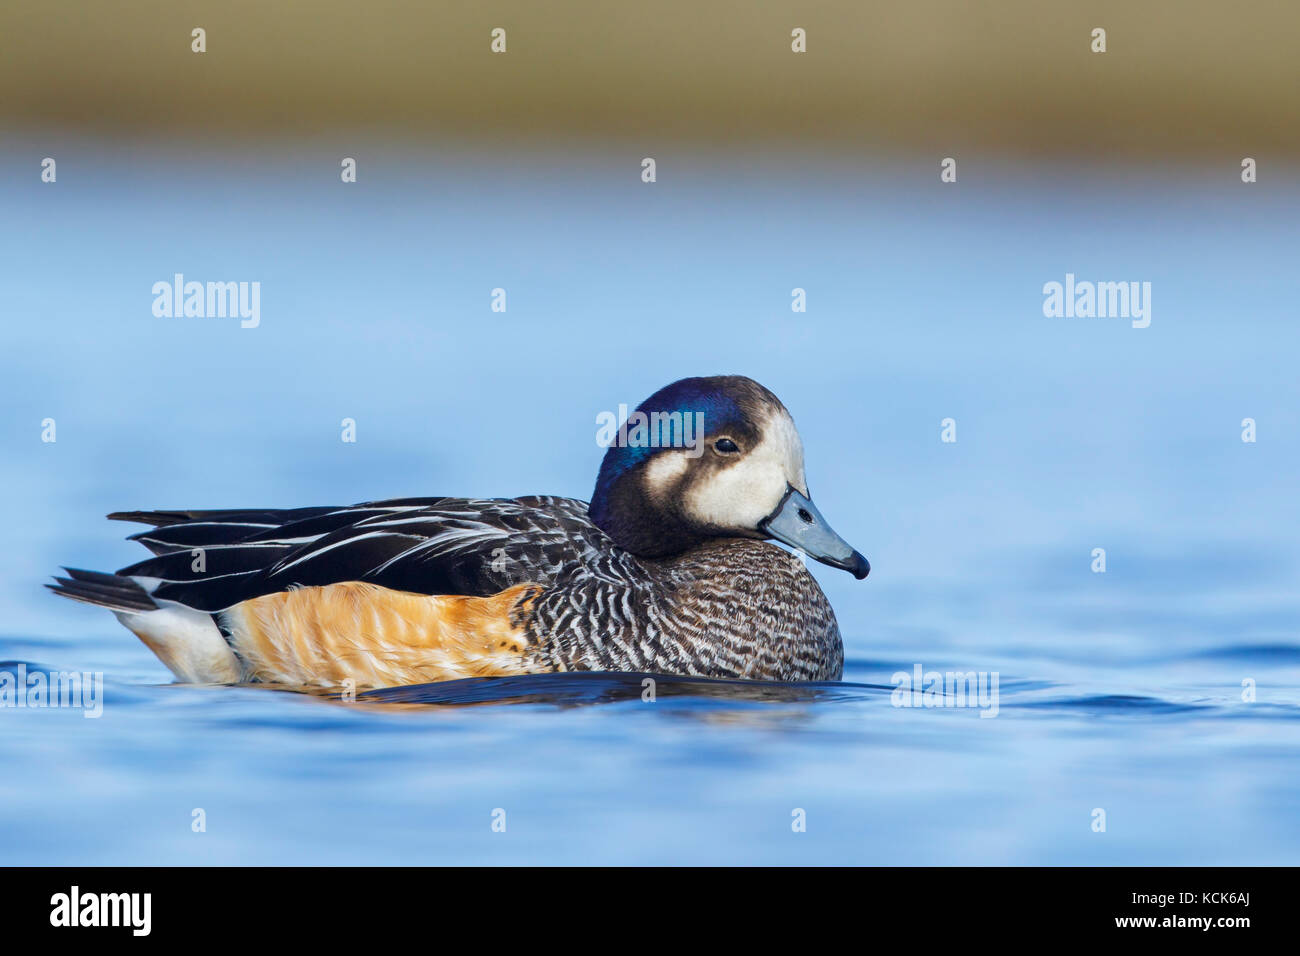 Chiloe Wigeon (Anas sibilatrix) swimming on a small pond in the Falkland Islands. Stock Photo